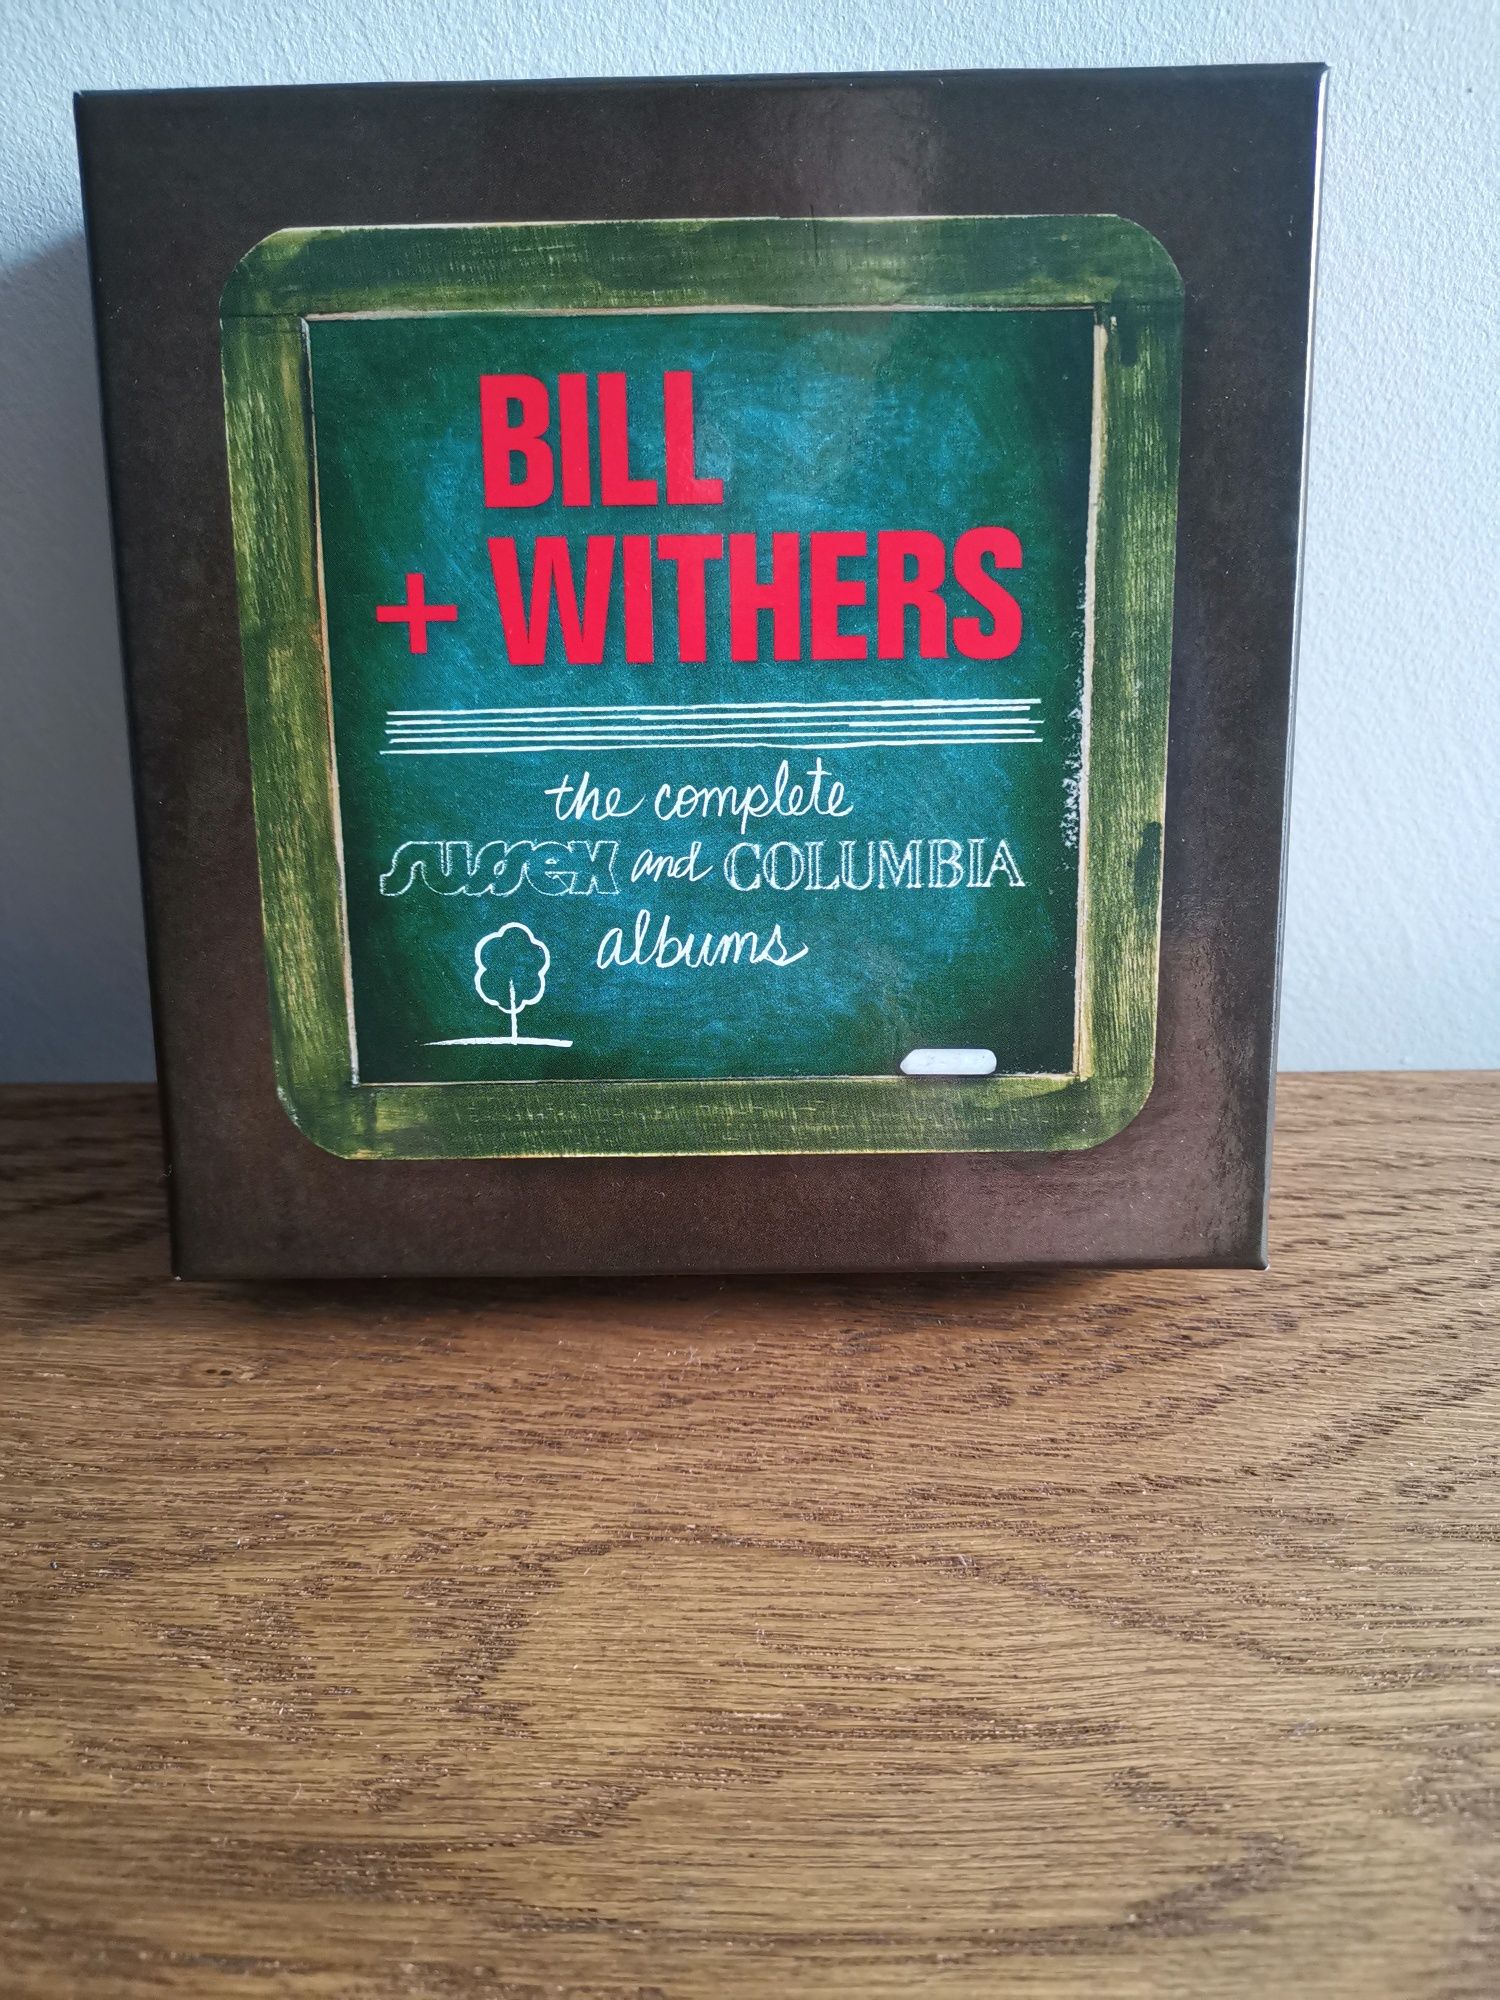 The Complete Sussex & Columbia Albums, Bill Withers